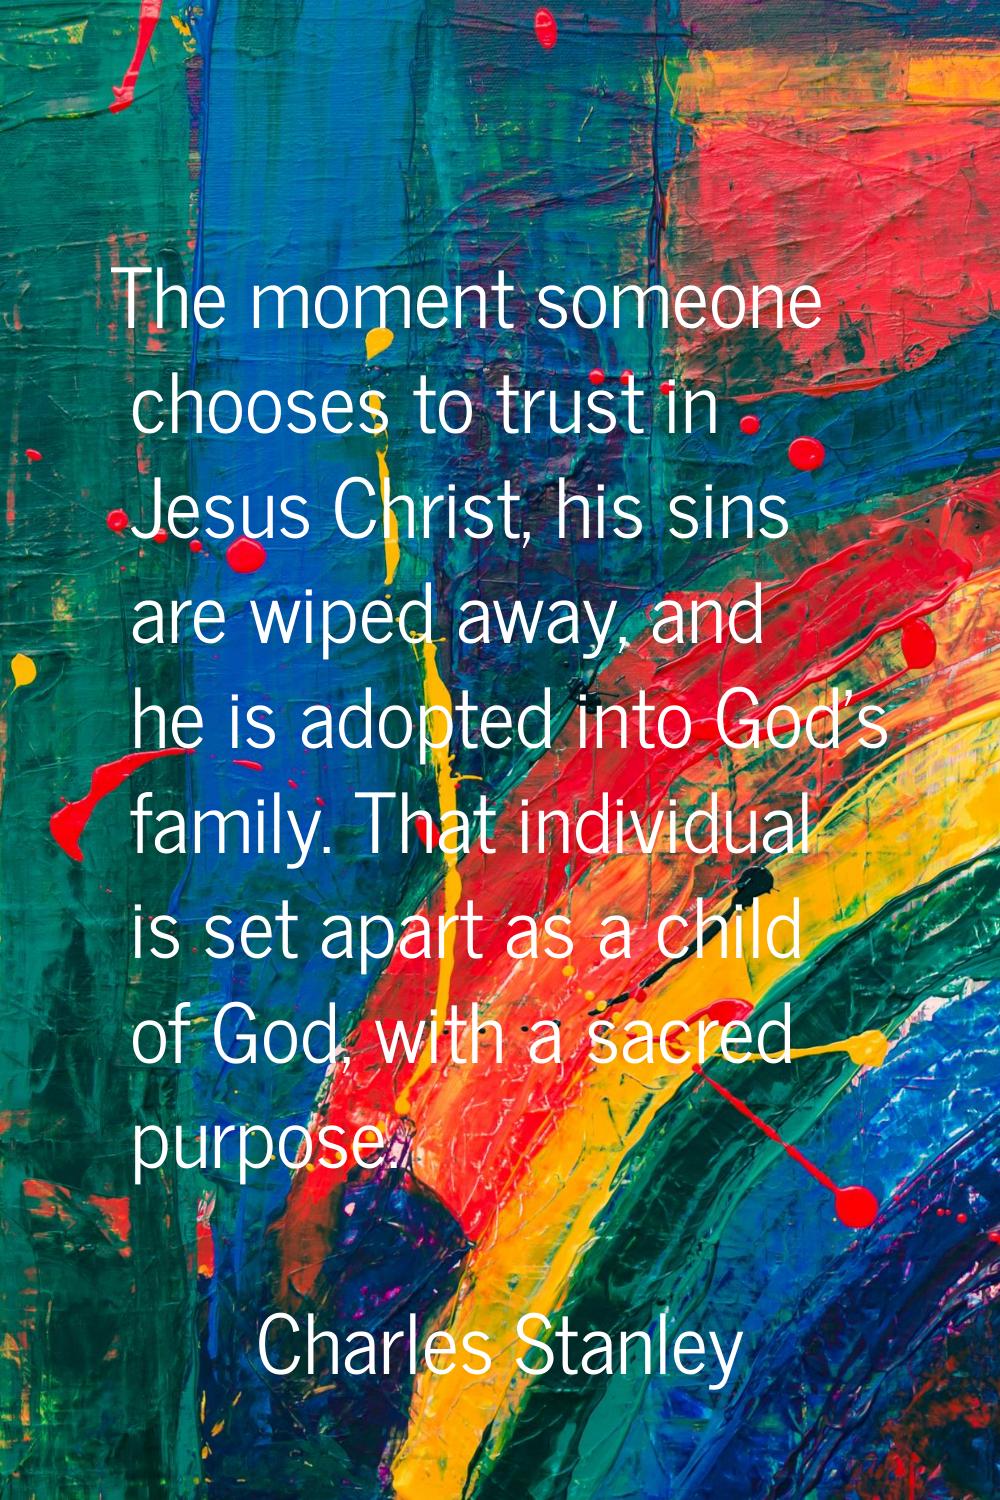 The moment someone chooses to trust in Jesus Christ, his sins are wiped away, and he is adopted int